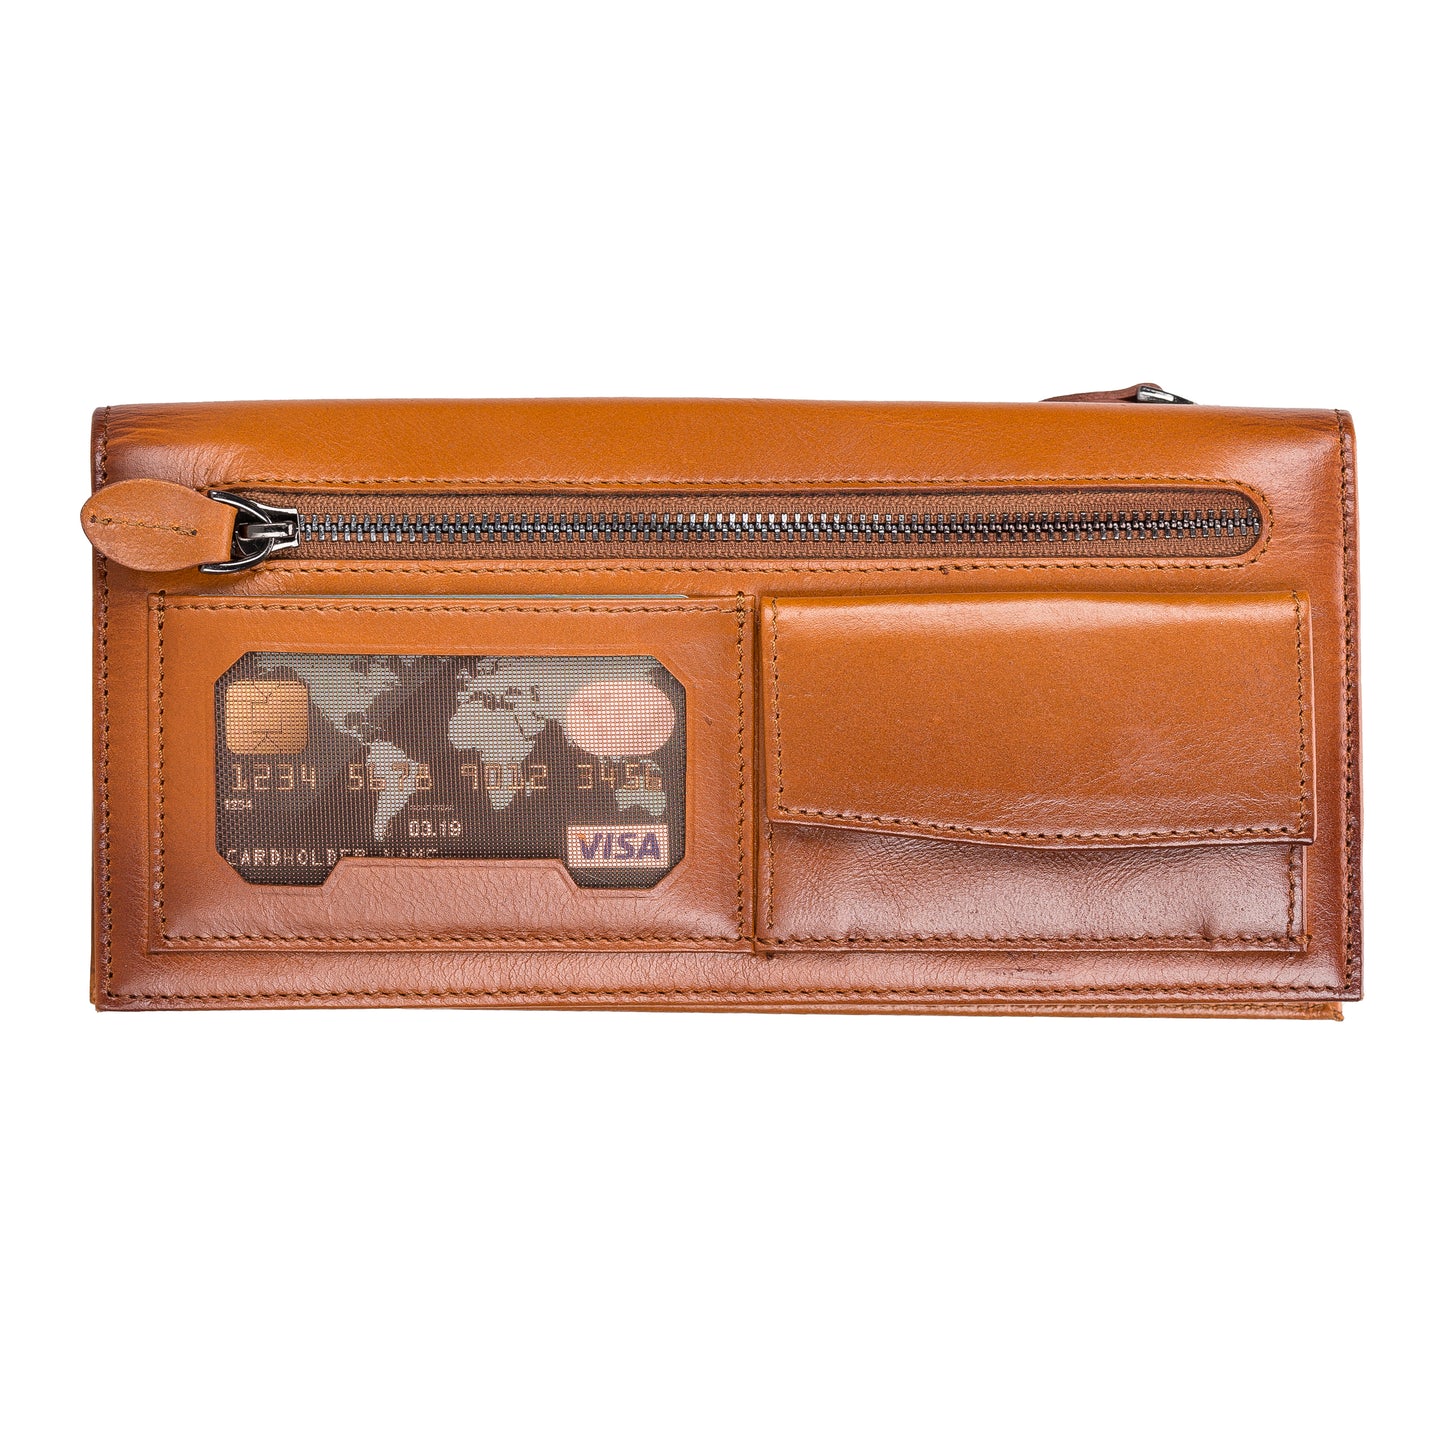 Creed Leather Men Wallet - Rustic Brown